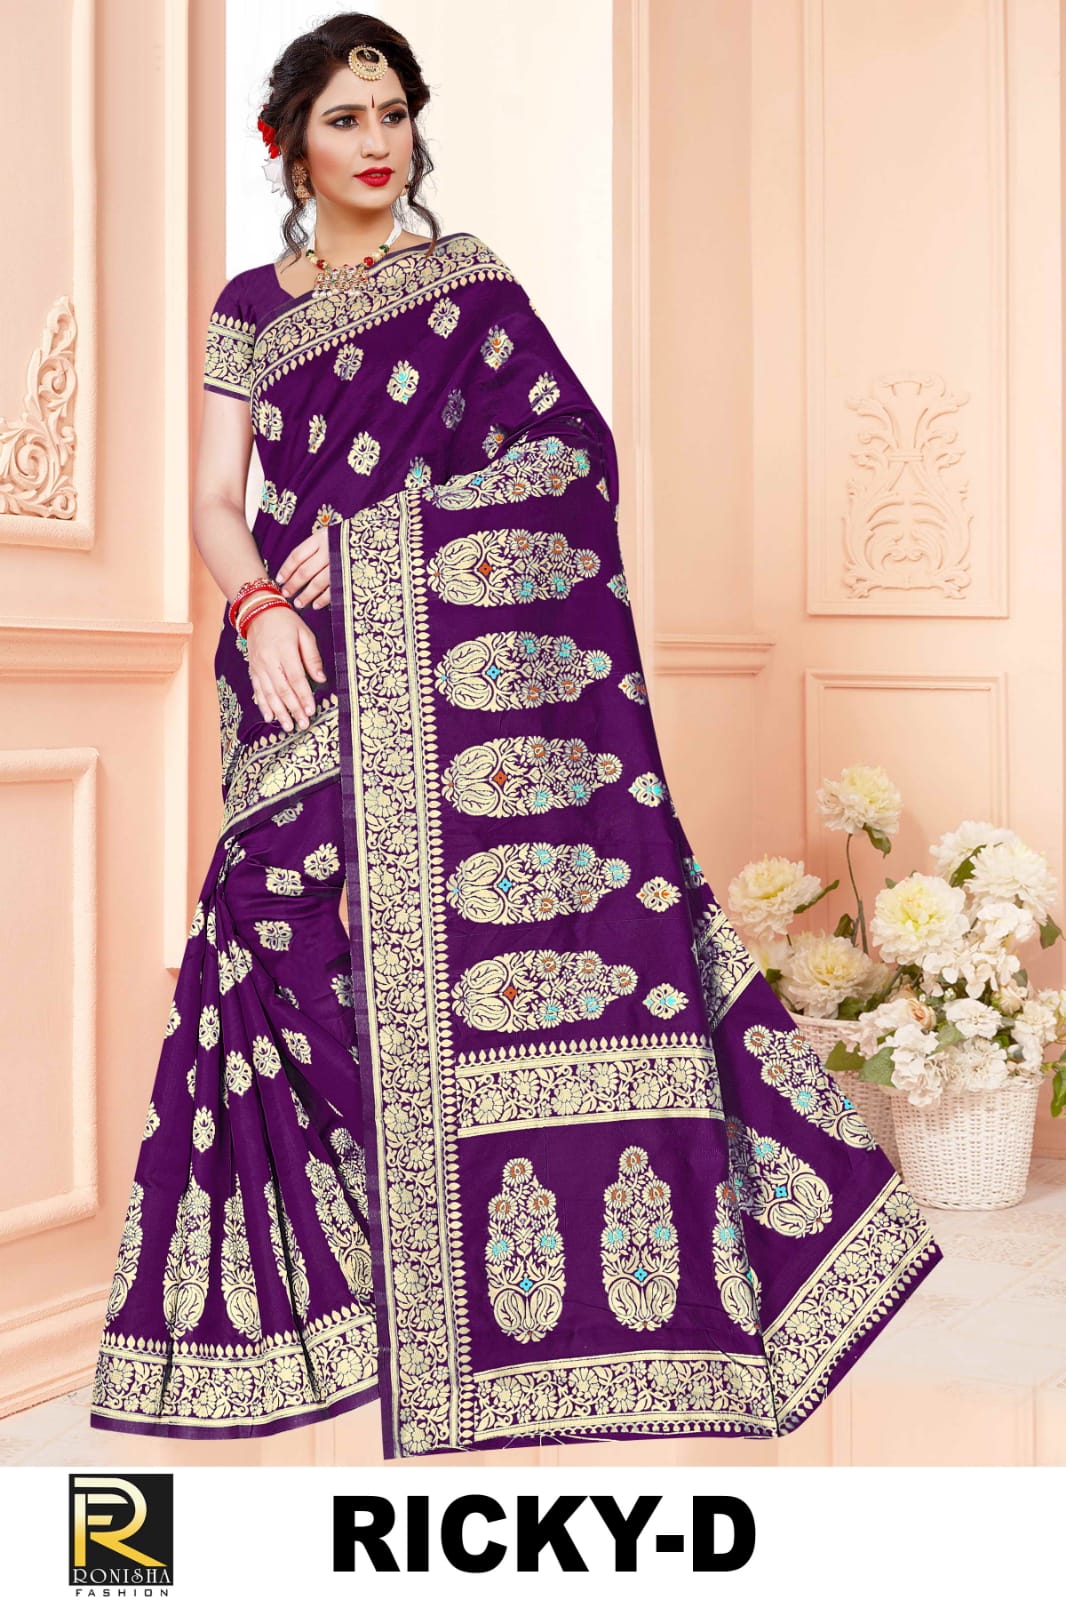 Ranjna Ricky Casual Wear Silk Saree Amazing Collection Online Shop